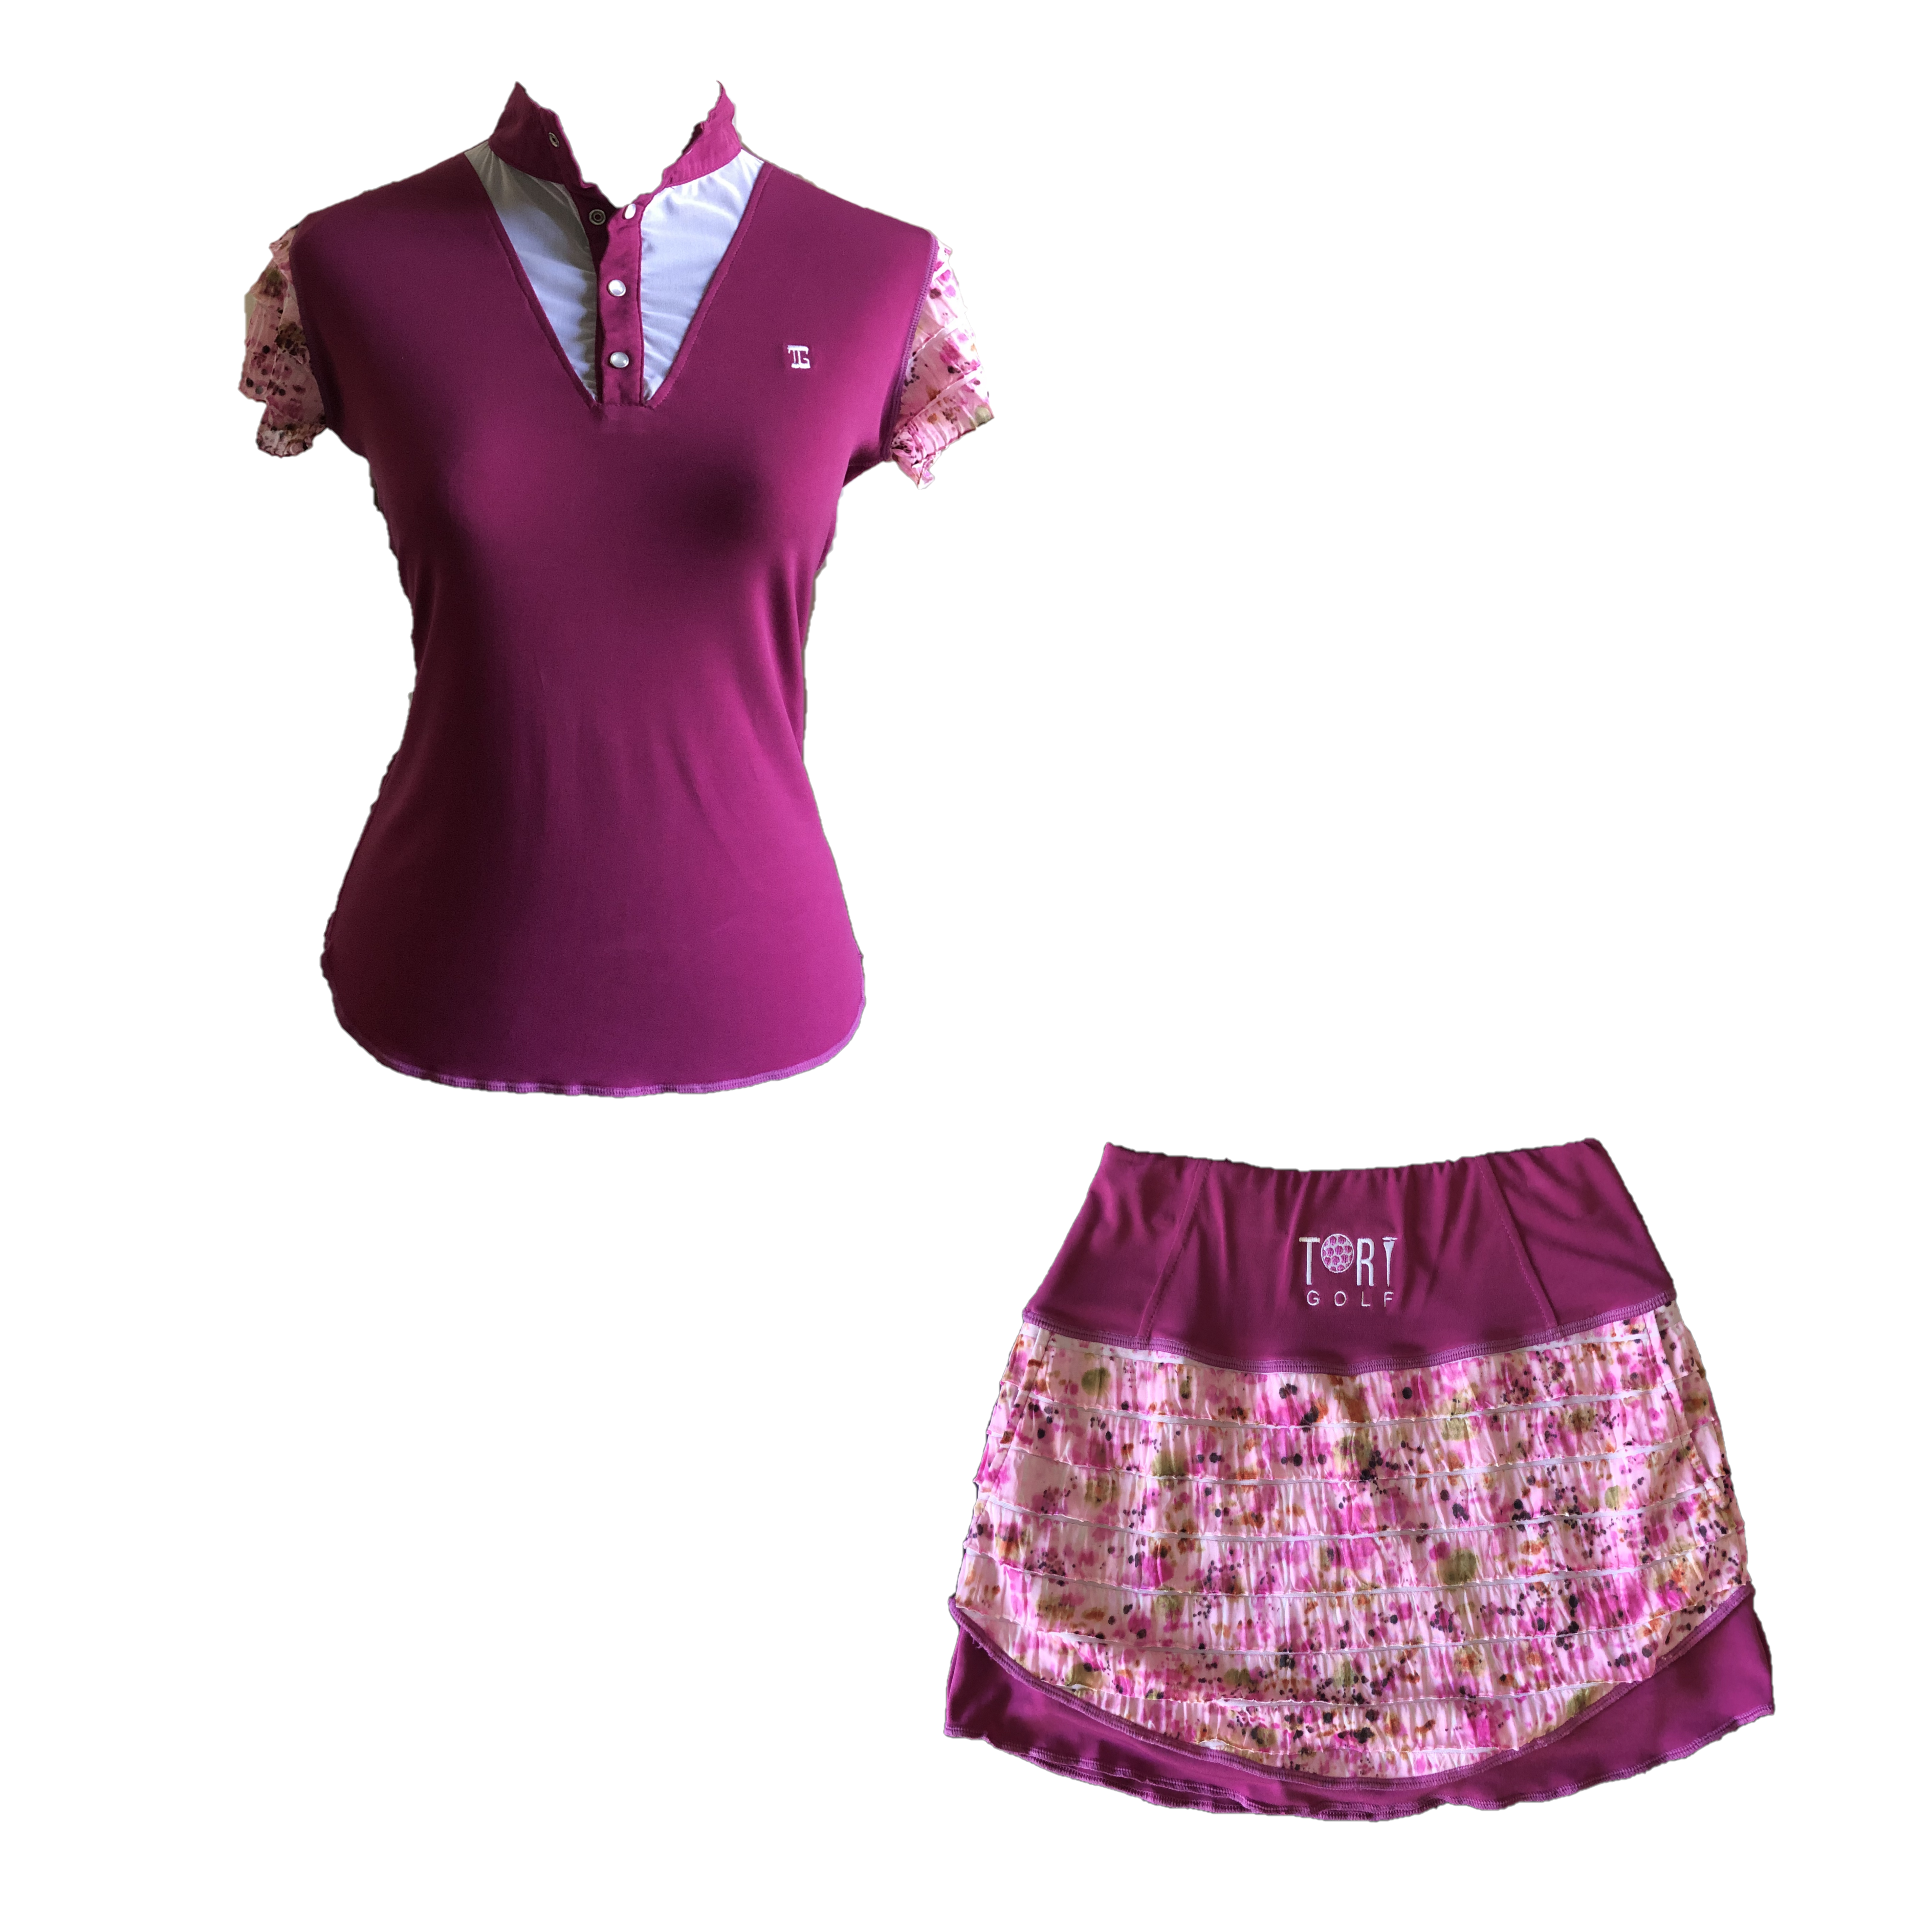 LGS-015A || Ladies Set Top Boysenberry Purple Shirred / Layered Brown & White Motif Sleeves Button Mandarin Collar White Neck V Inset – Skirt  Boysenberry with White and Pale Green  Horizontal  Flouncess – 2 Side and One Rear Waste Zip Pocket